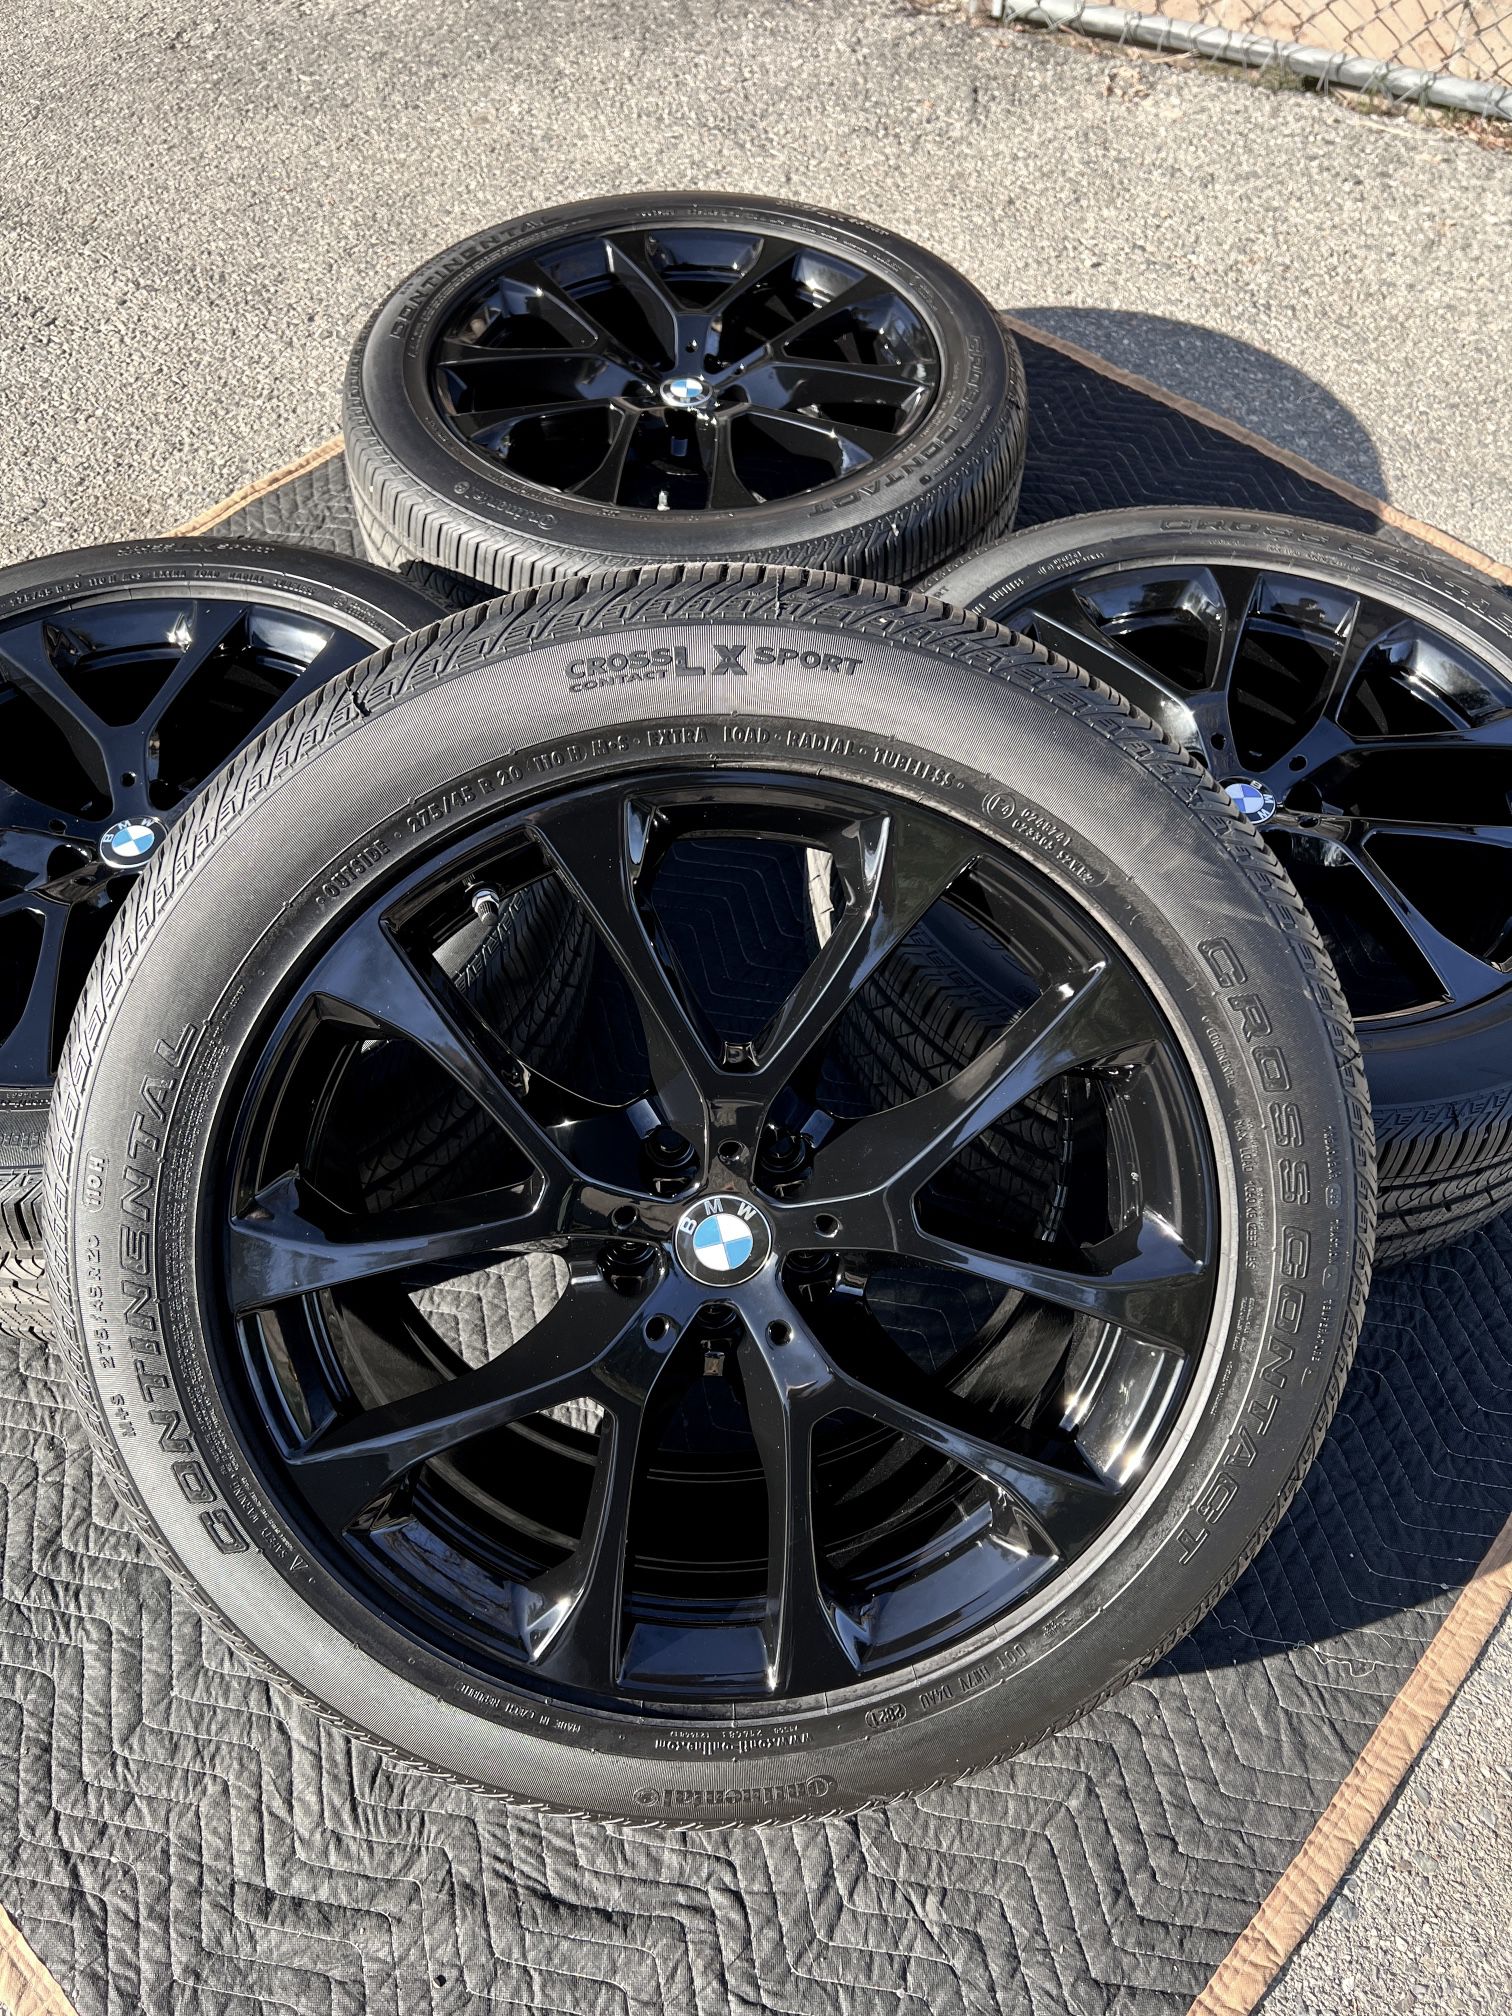 (CASH ONLY) Oem Factory 20” BMW X5 M-Sport Xdrive Style 738M Black Tires Wheels Rims Rines